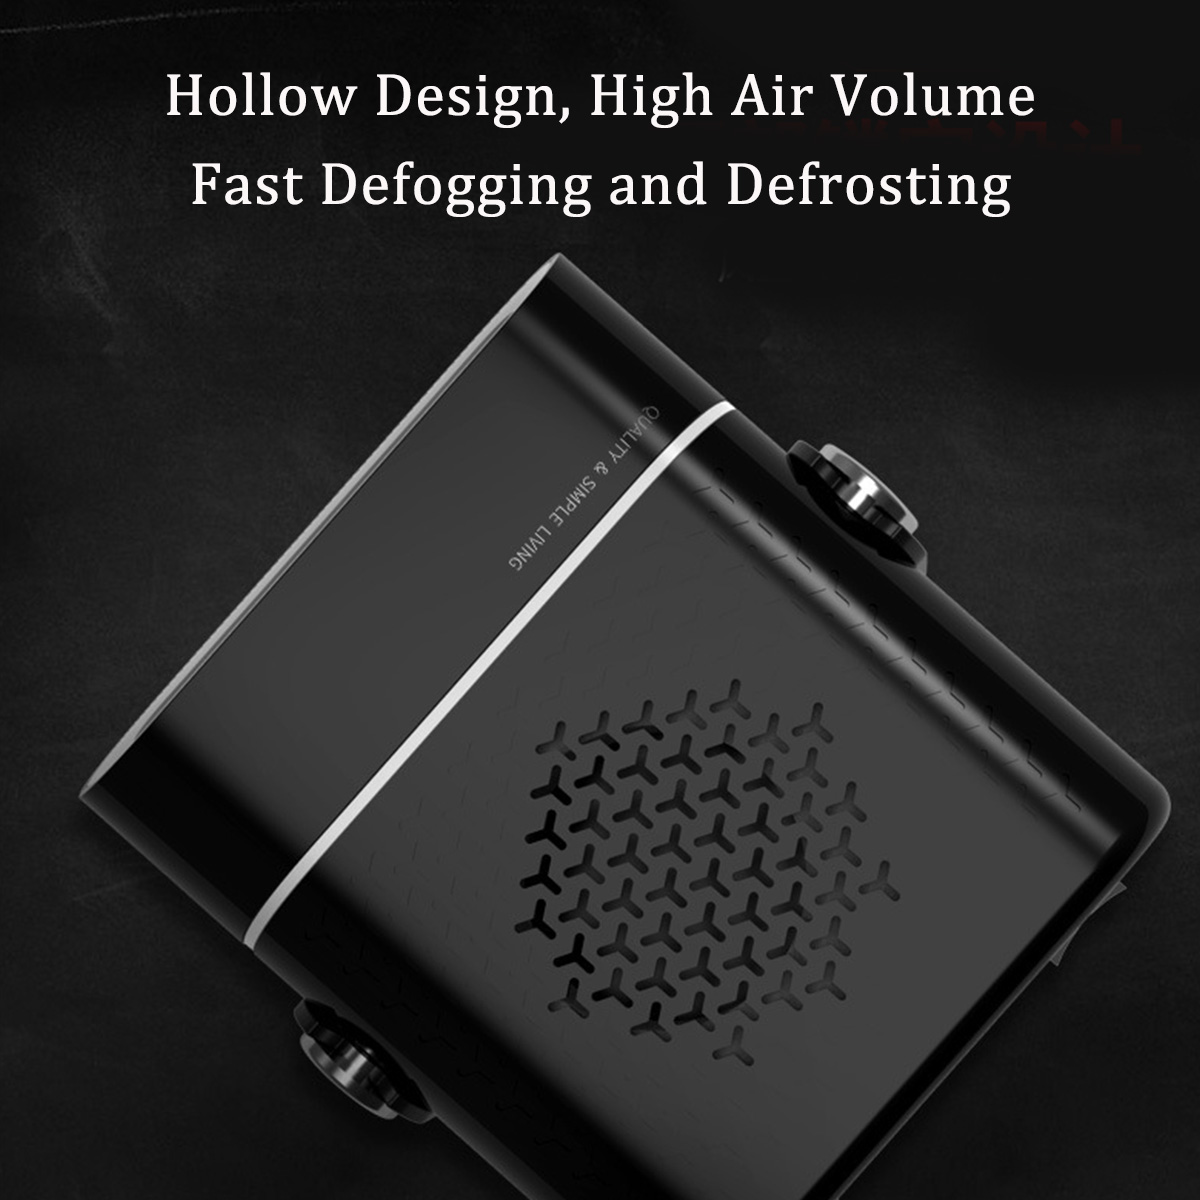 Portable-Car-Heater-Fast-Heating-Fan-360-Degree-Rotary-Winter-Defroster-Demisting-Air-Purification-1-1773296-5